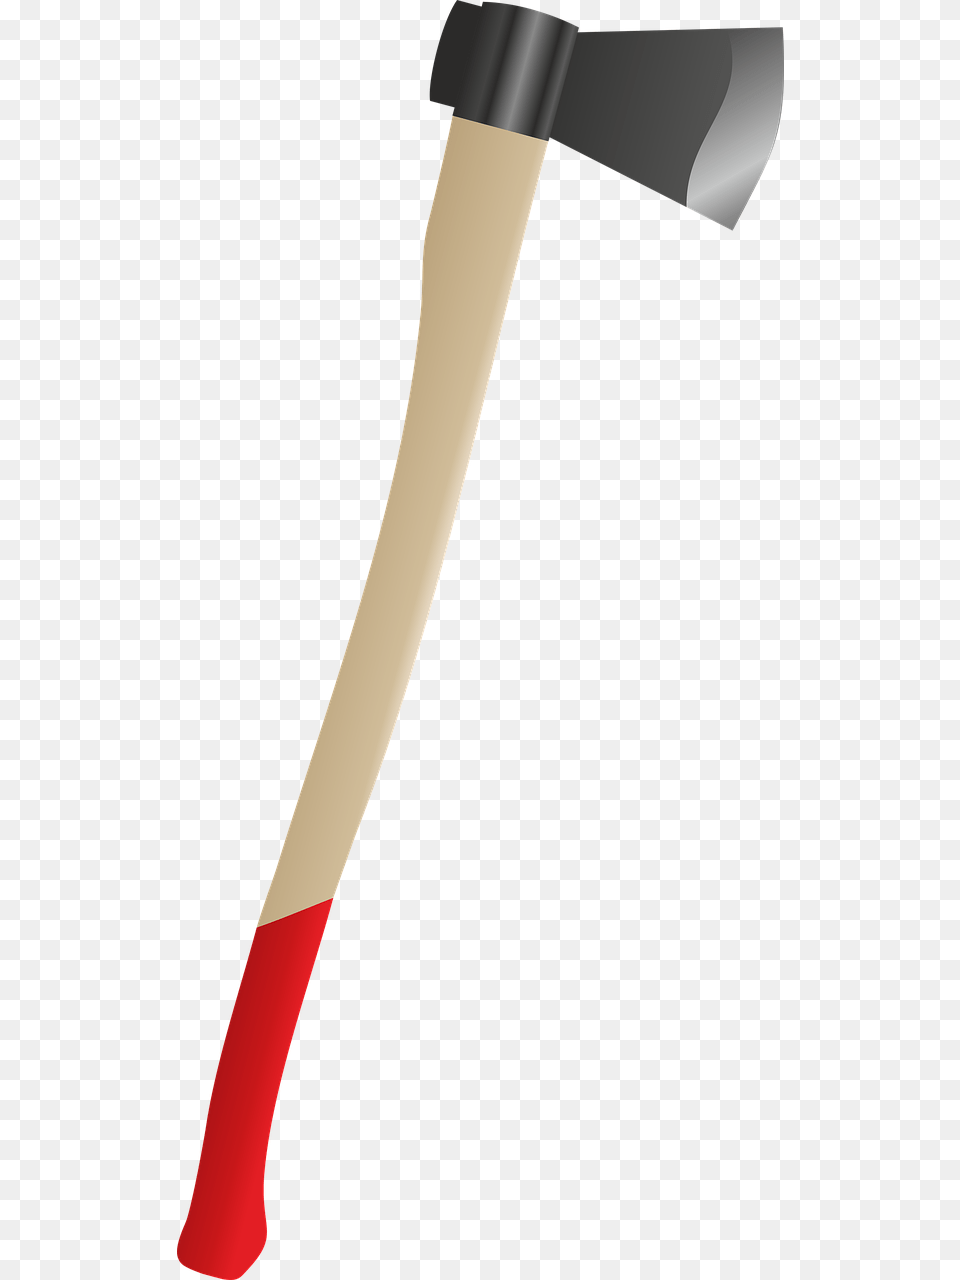 Axe Red Pen Fire Axe Photo Carmine, Weapon, Device, Tool Png Image